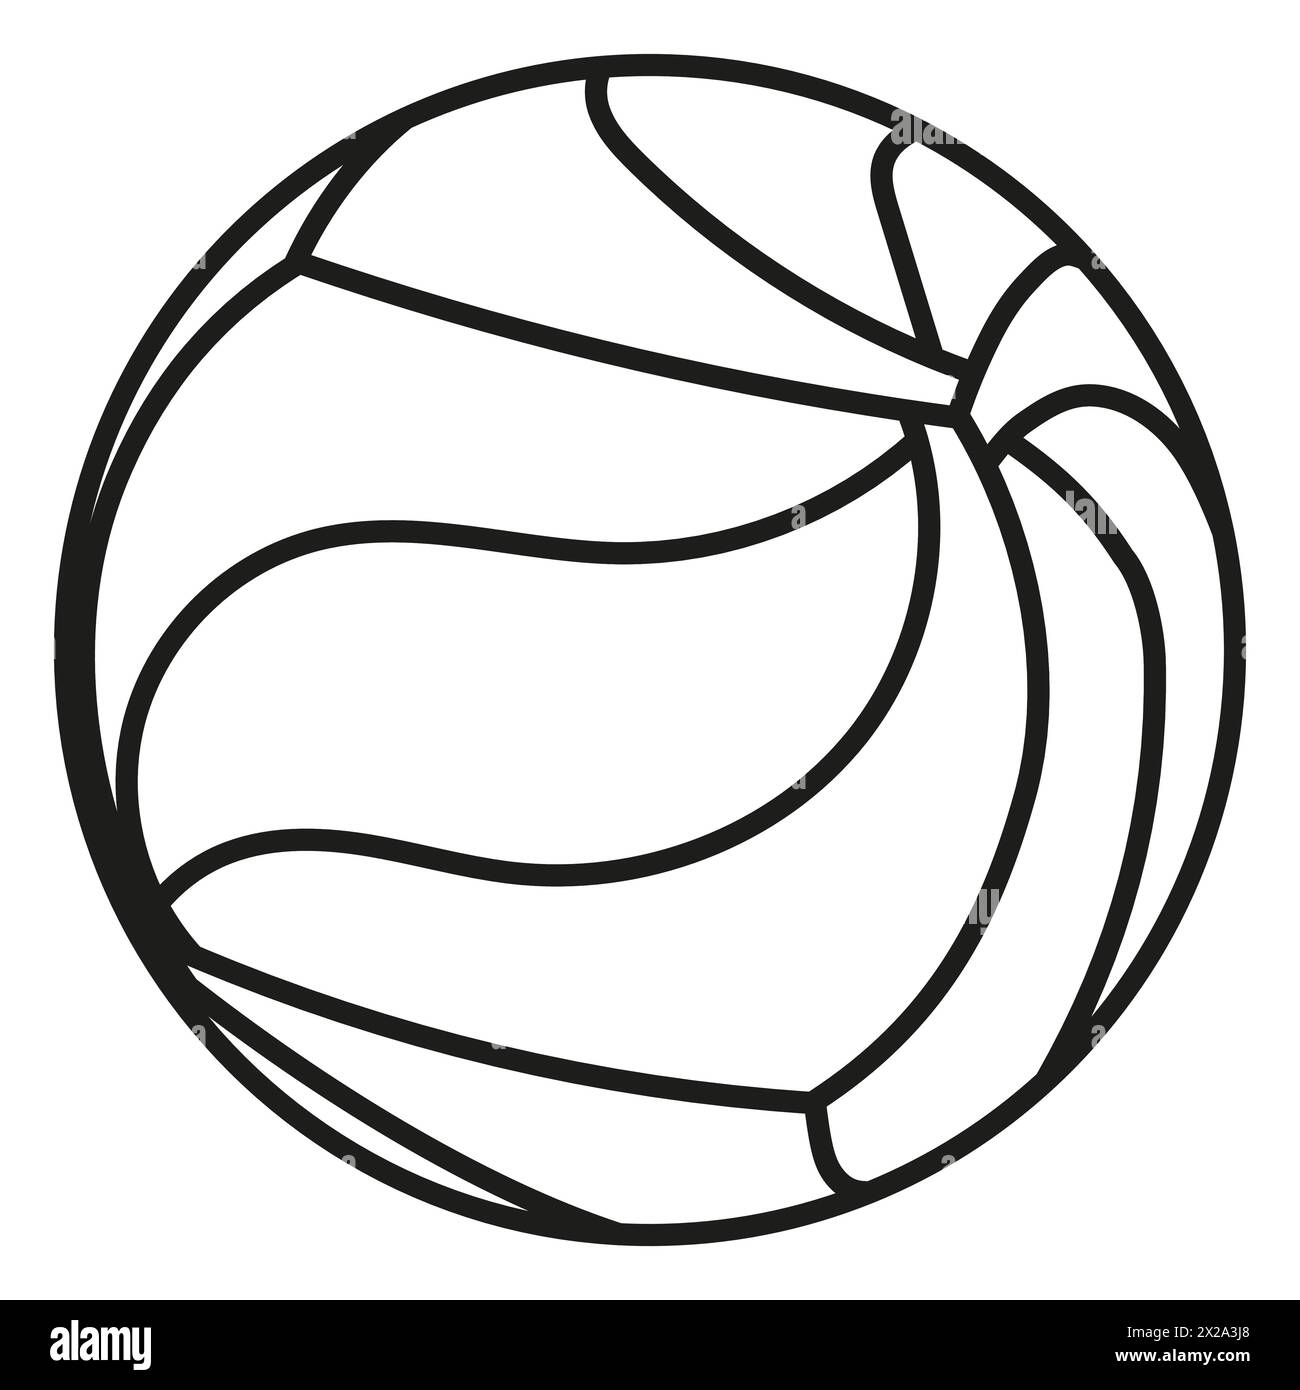 Volleyball ball line art icon for sports apps and website, flat design Stock Vector